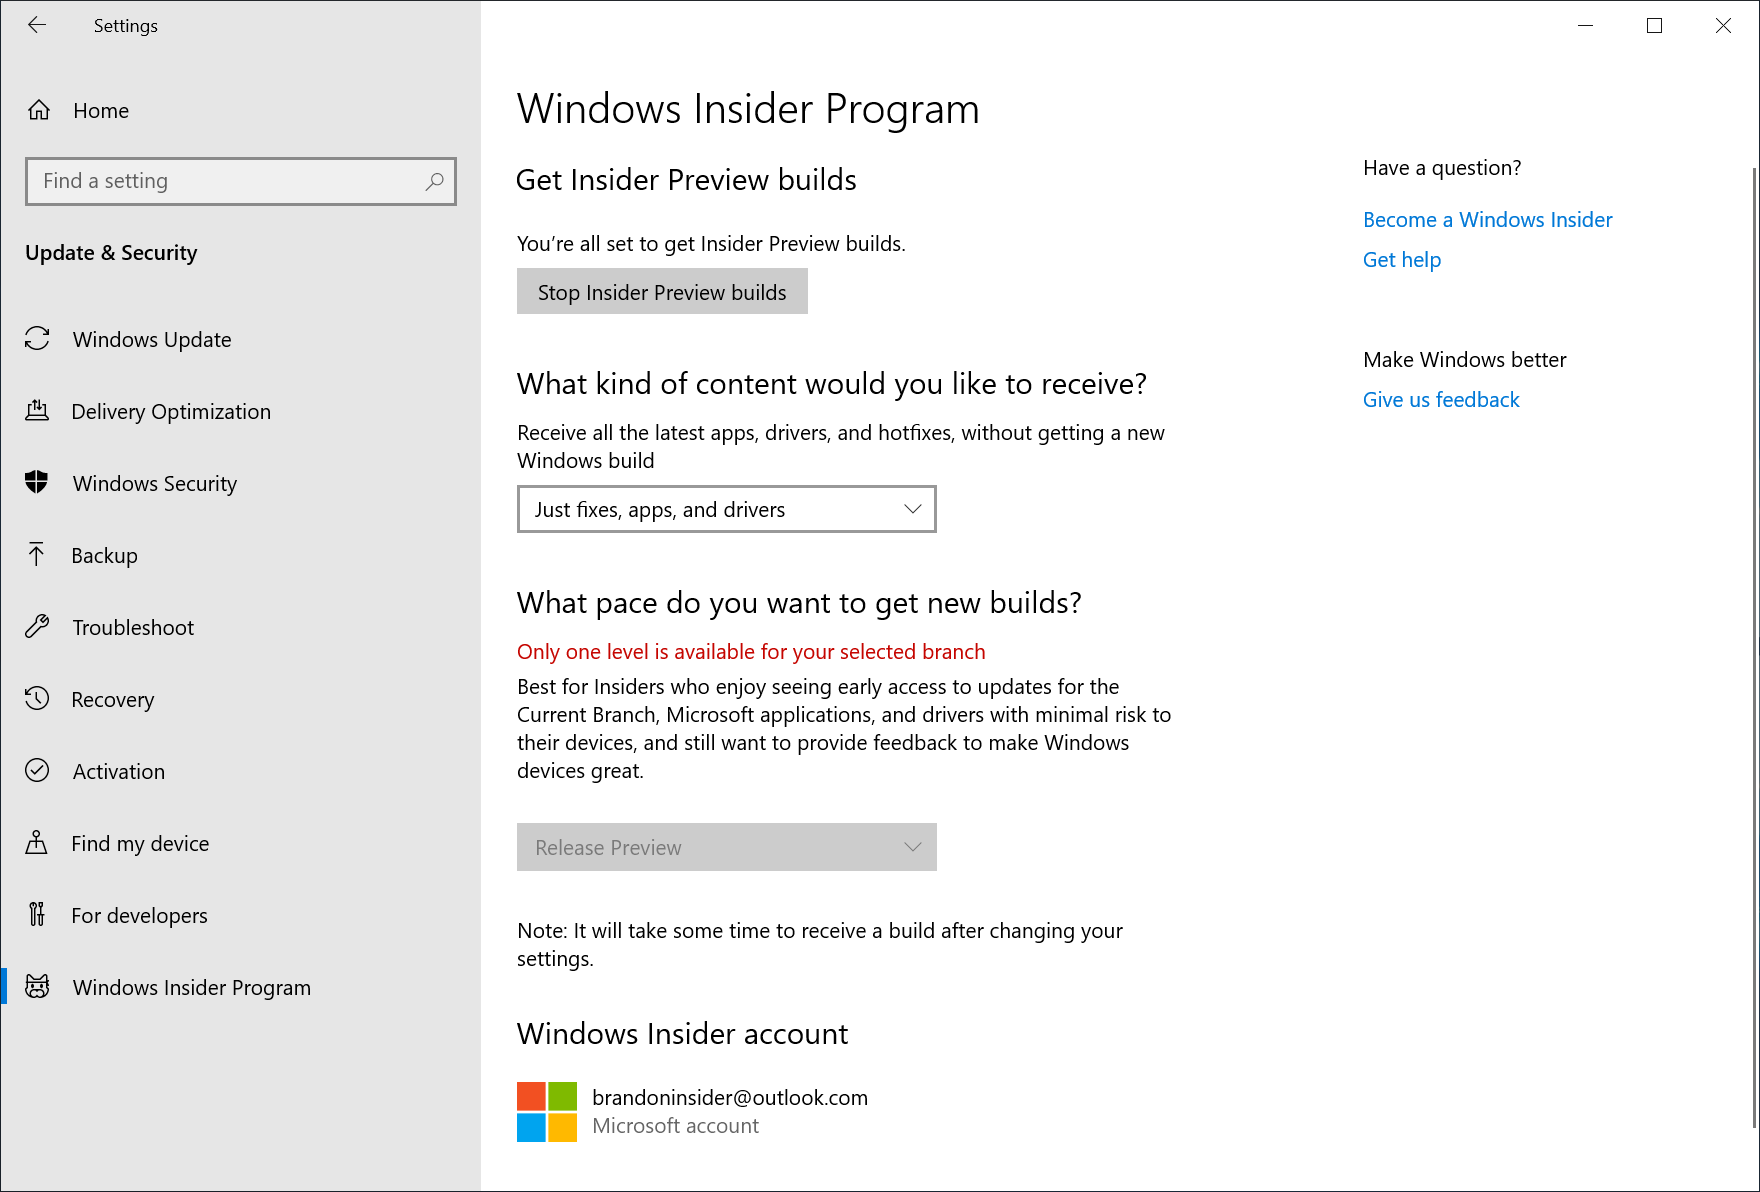 After rebooting your PC, double-check your Windows Insider Program settings via Settings > Update & Security > Windows Insider Program and make sure it shows “Release Preview” under “What pace do you want to get new builds?”. 